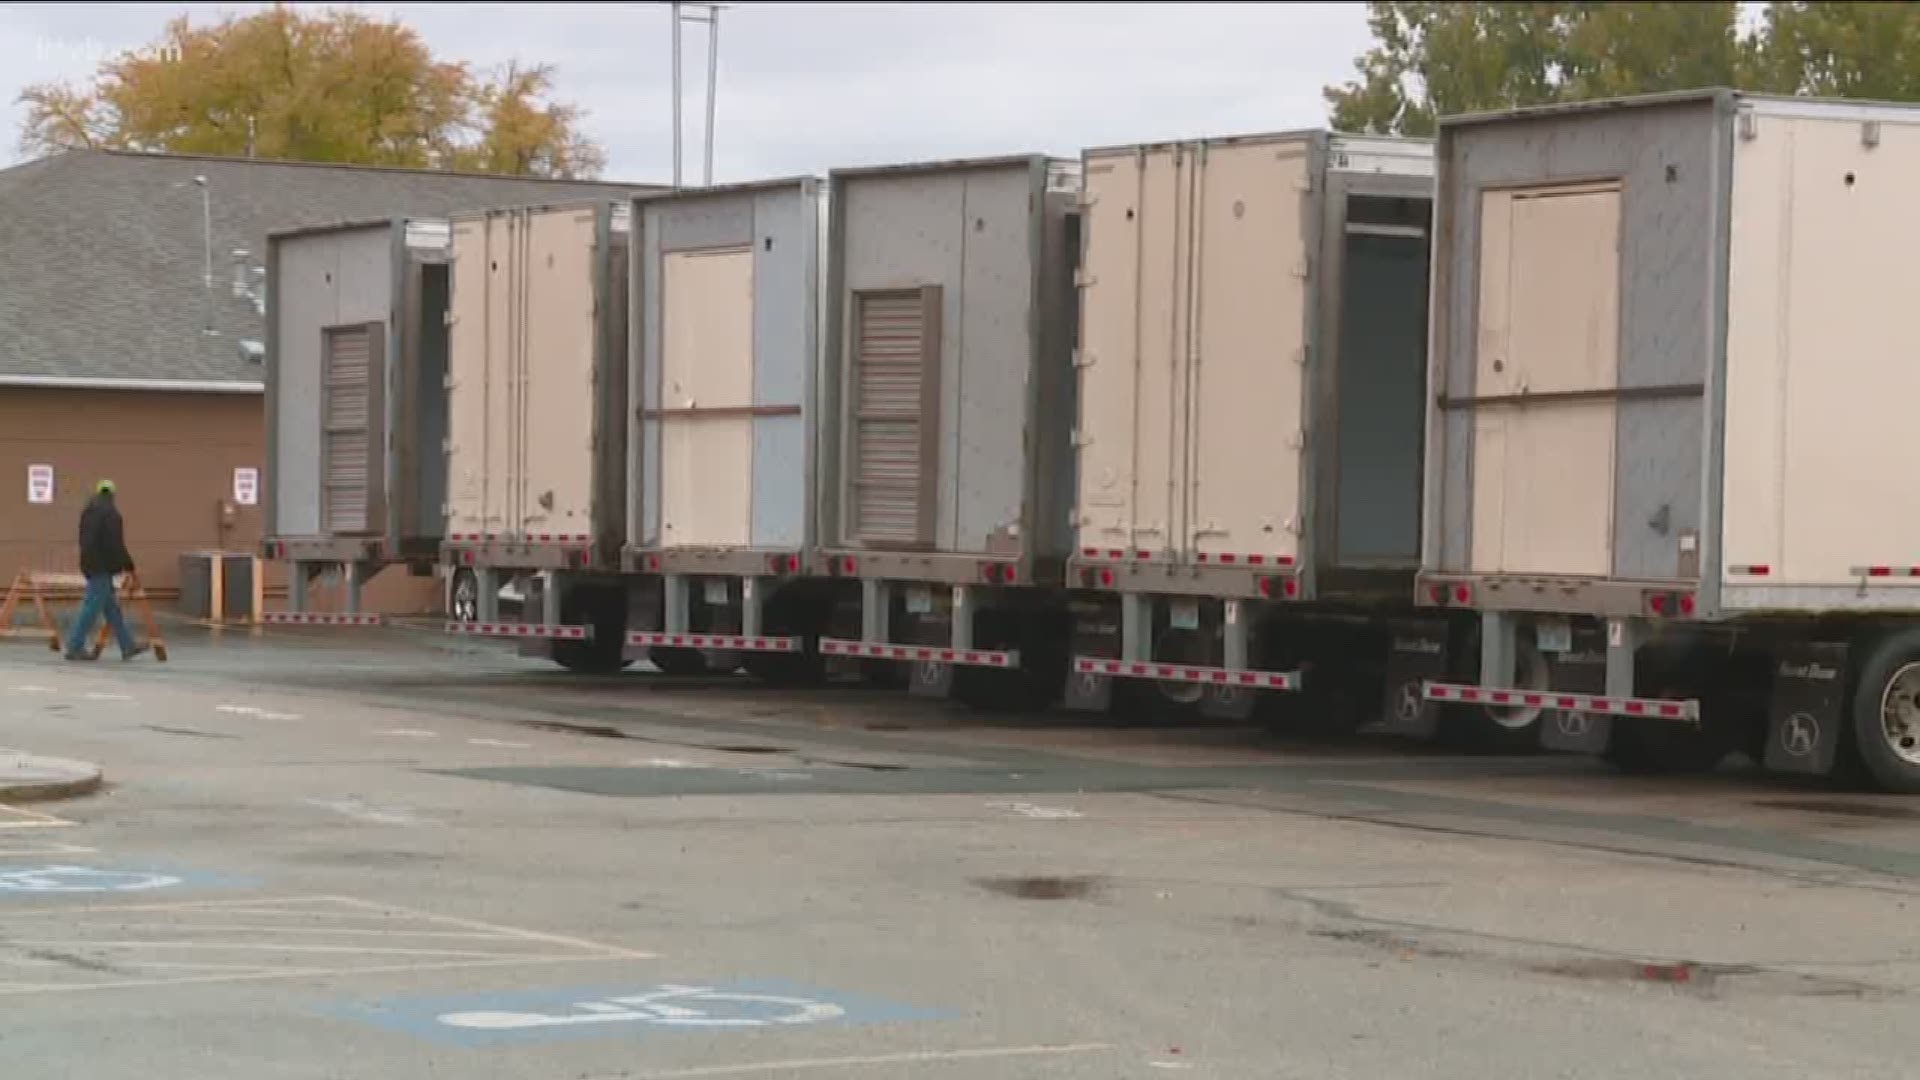 In a first for the state of Idaho, the Canyon County Jail is bringing in 20 trailers to house some of their female inmates.